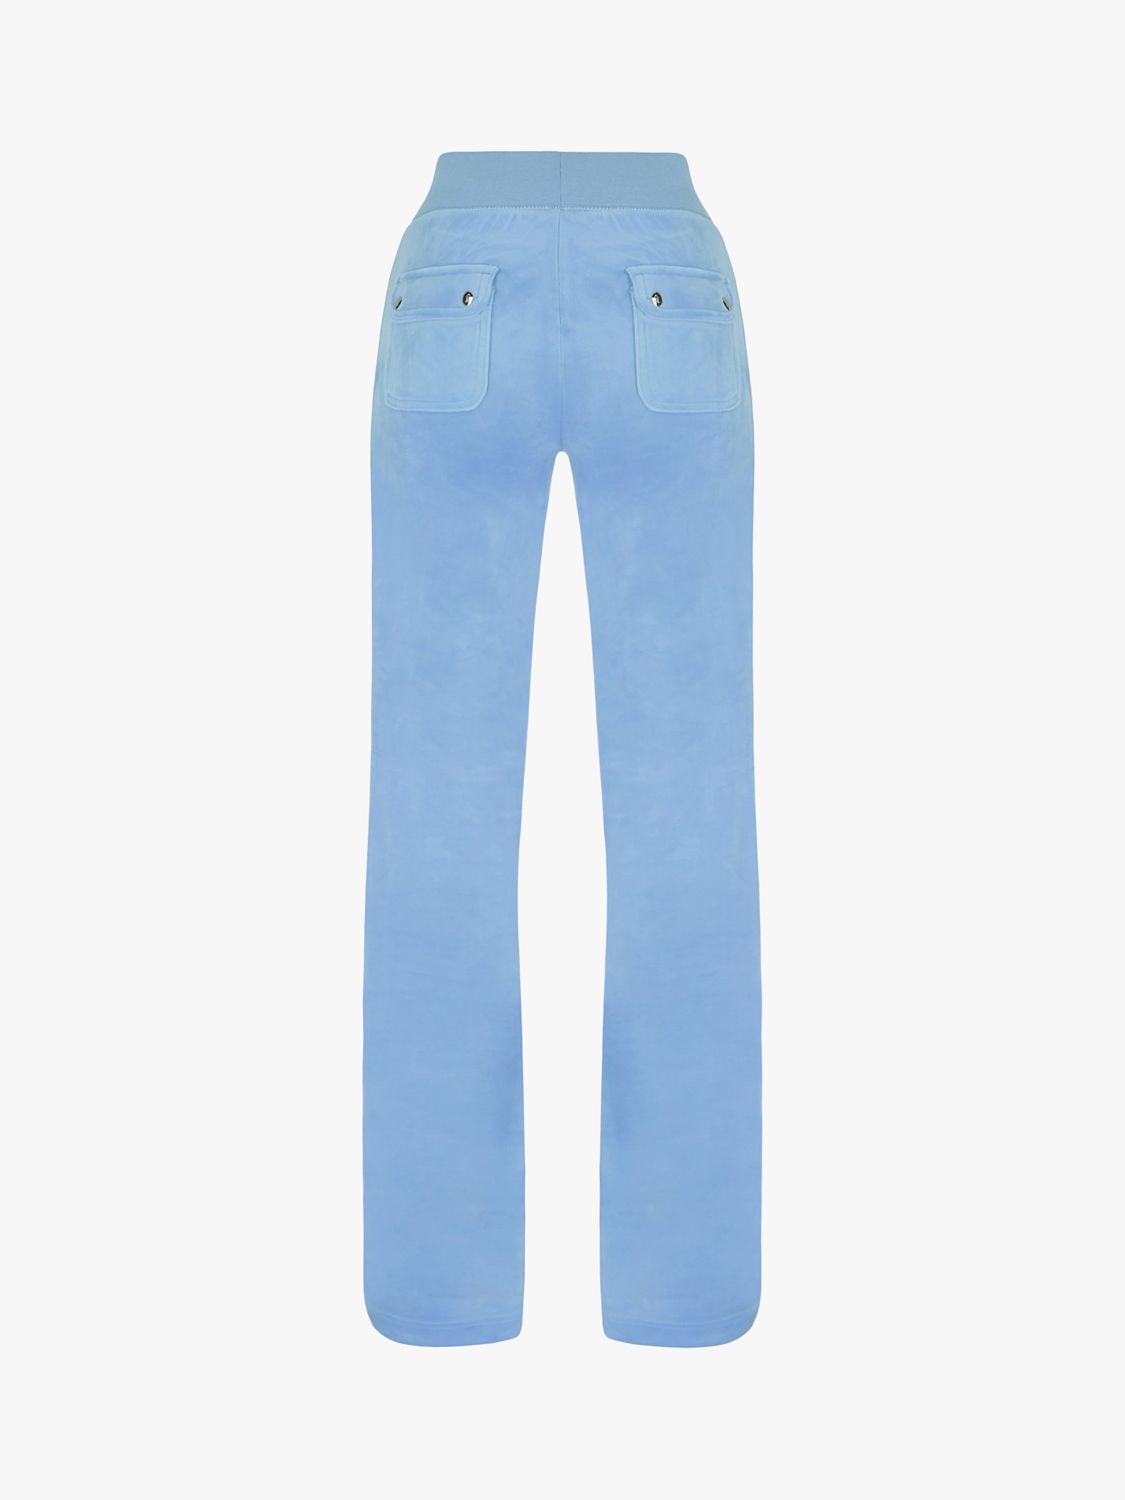 Juicy Couture Del Ray Tracksuit Bottoms, Powder Blue at John Lewis